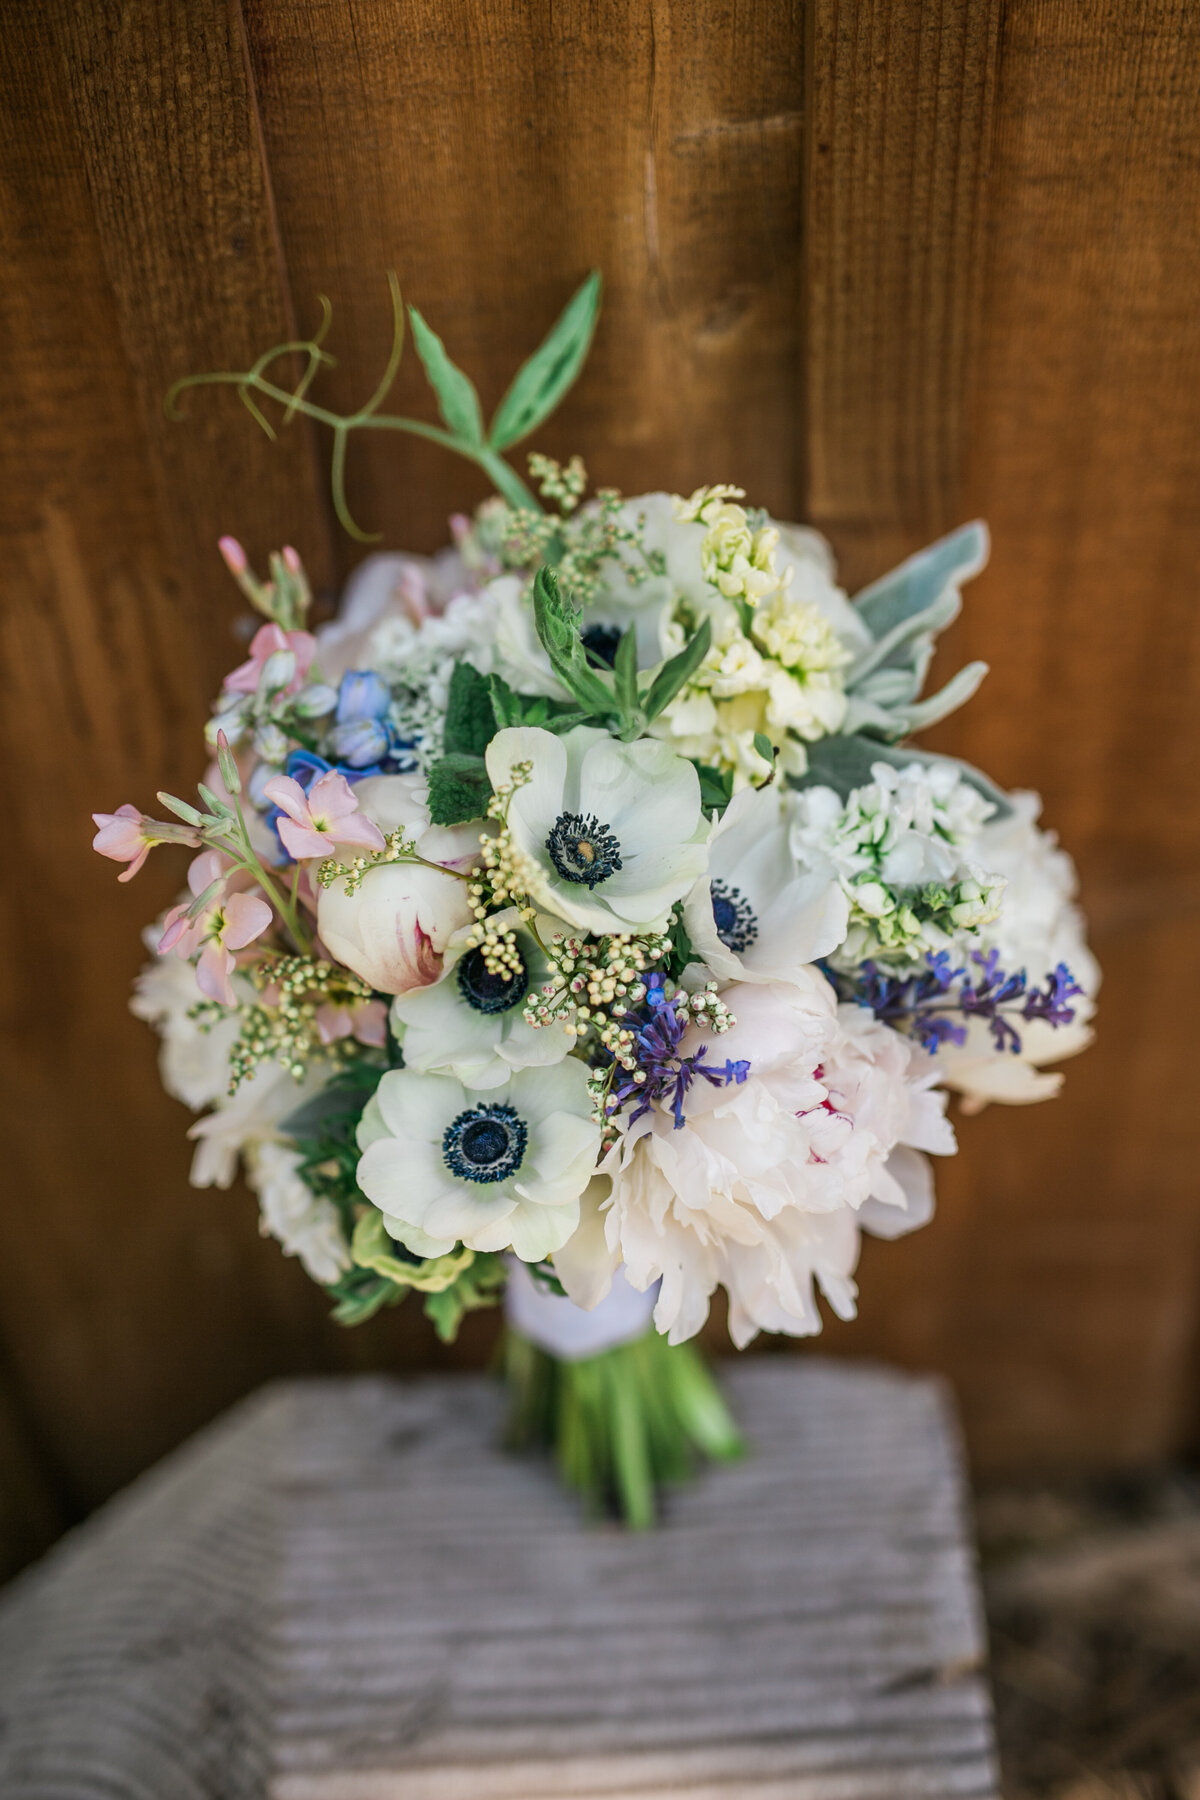 BeeHaven Flower Farm Bonners Ferry Idaho Floral Florals Classes Workshops Farm Stand Fresh Cut Flower Bouquets All Occasion Flowers Weddings Events Wedding Funeral Sympathy Grower Growing Farmer 8